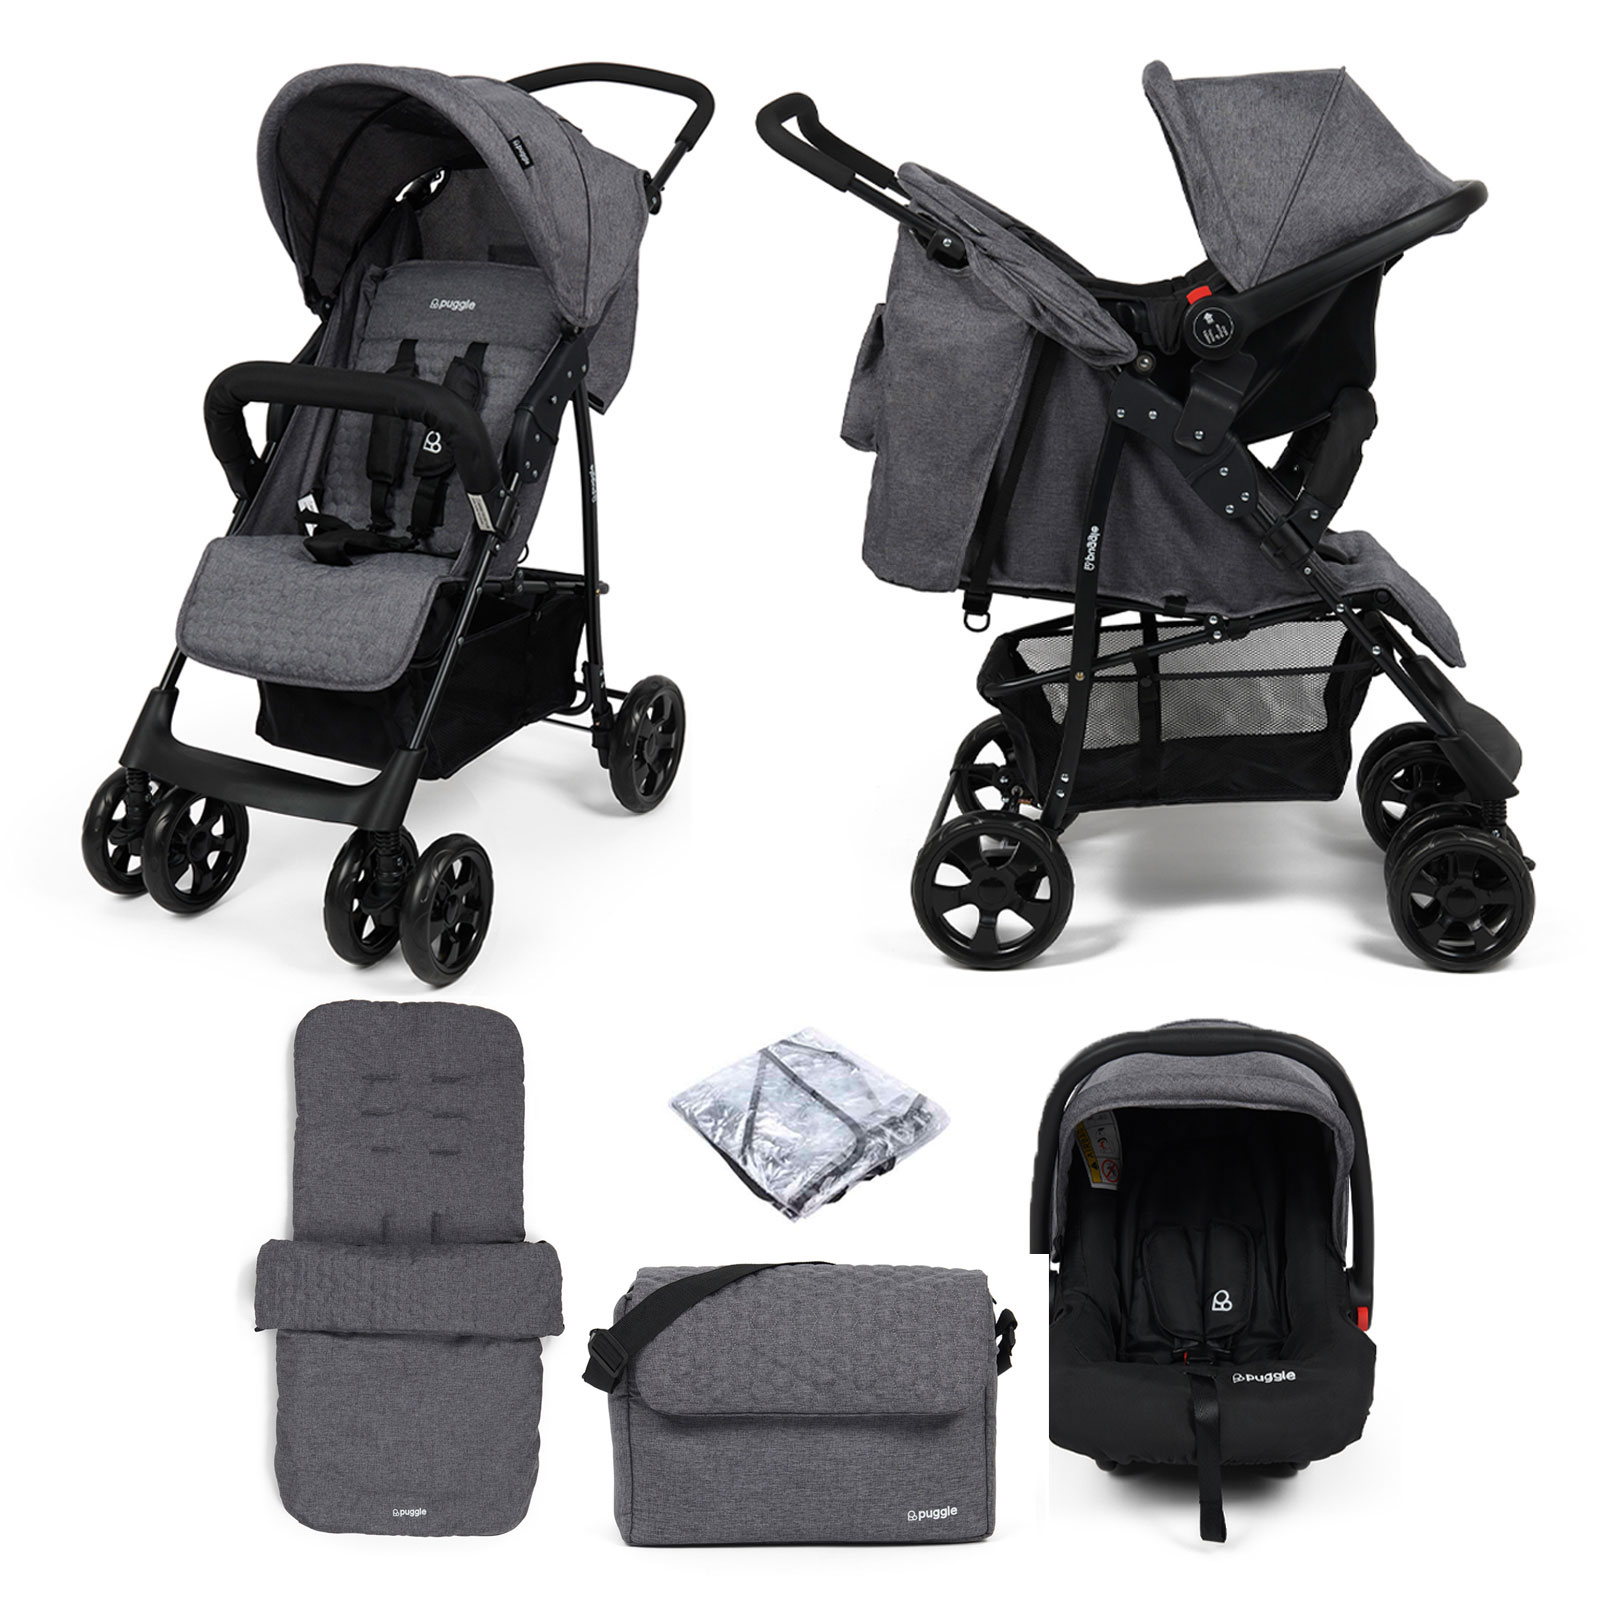 Puggle Lowton Luxe 2in1 Travel System with Raincover, Universal Honeycomb Footmuff & Changing Bag – Graphite Grey